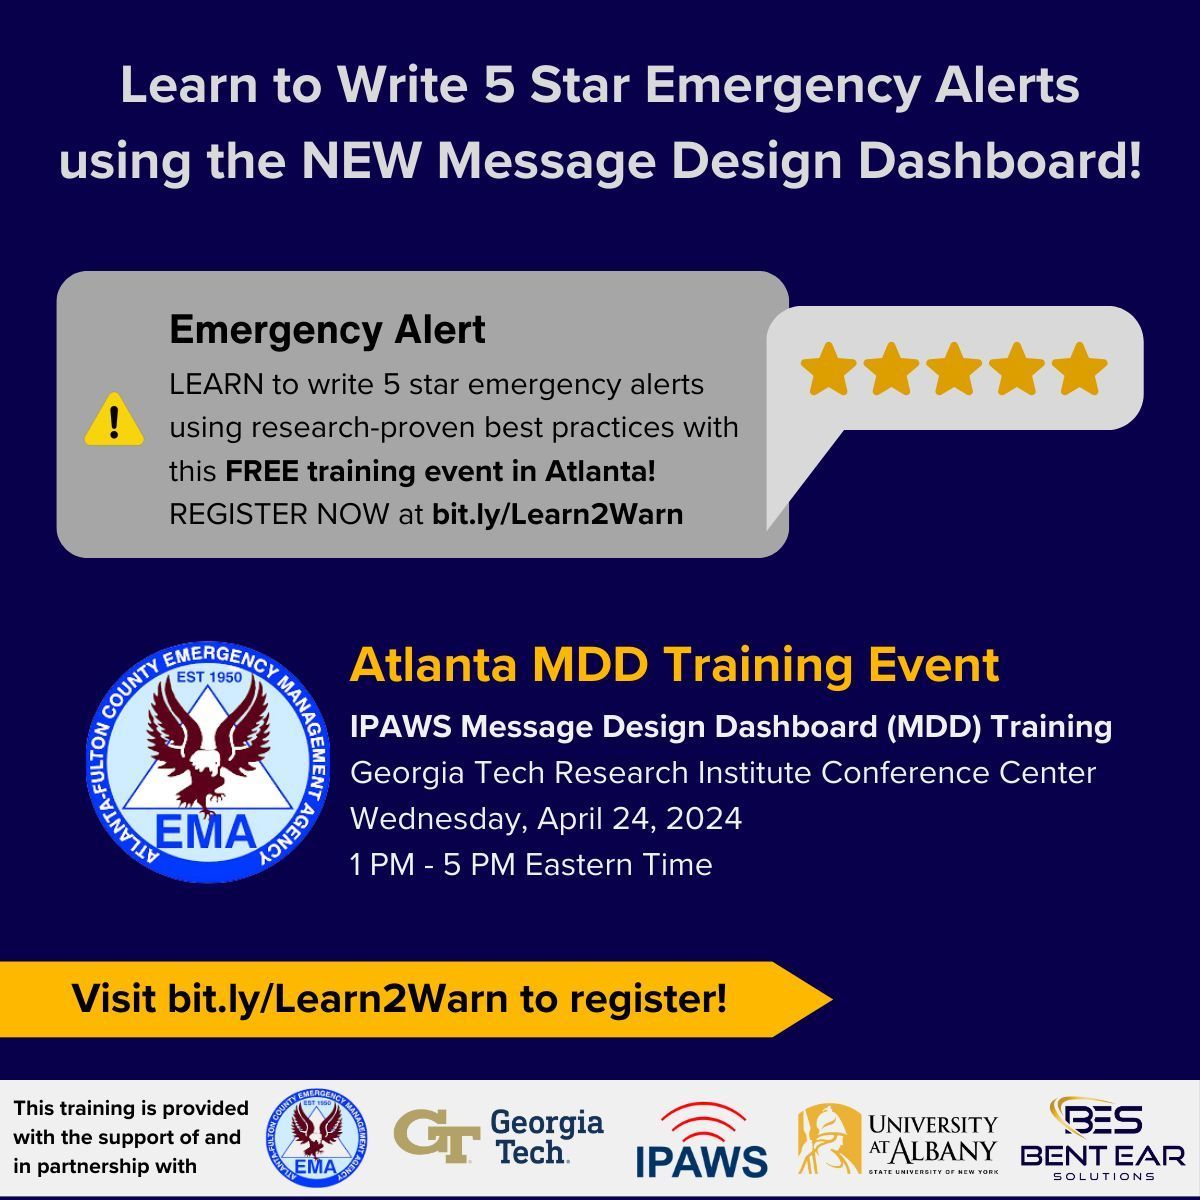 📣 Our MDD training team will be in Atlanta next week to deliver a FREE, in-person training for Effective Message Writing and the Message Design Dashboard, hosted by @afcema at @GeorgiaTech! 🔗 Learn more and register at bit.ly/learn2warn. #Learn2Warn #EMGTwitter